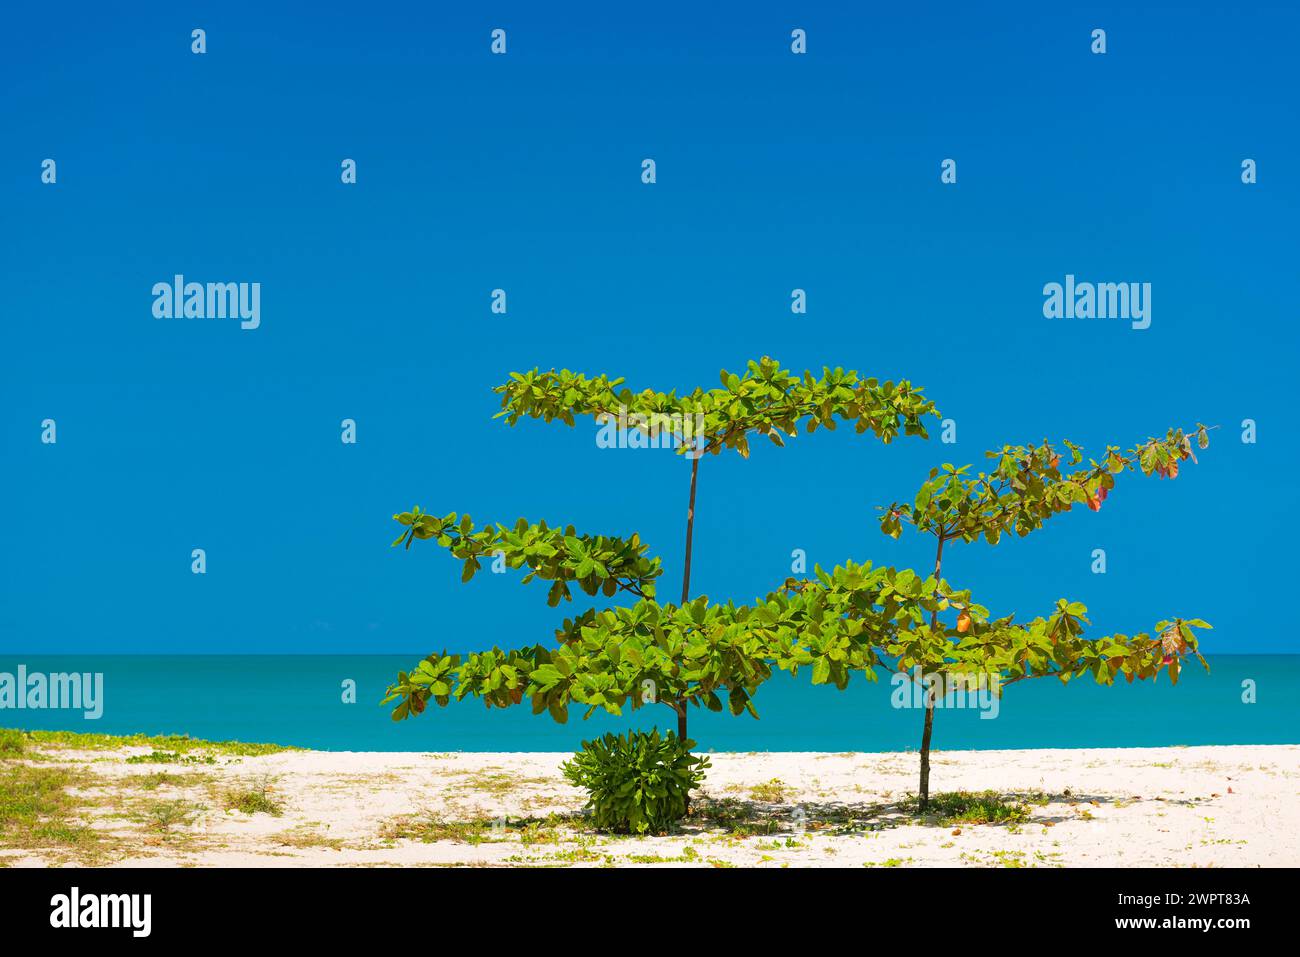 Rubiaceae on the beach of Khao Lak, beach, clean, clear, tree, bush, plant, nature, natural beach, holiday, travel, landscape, sea, ocean, weather Stock Photo